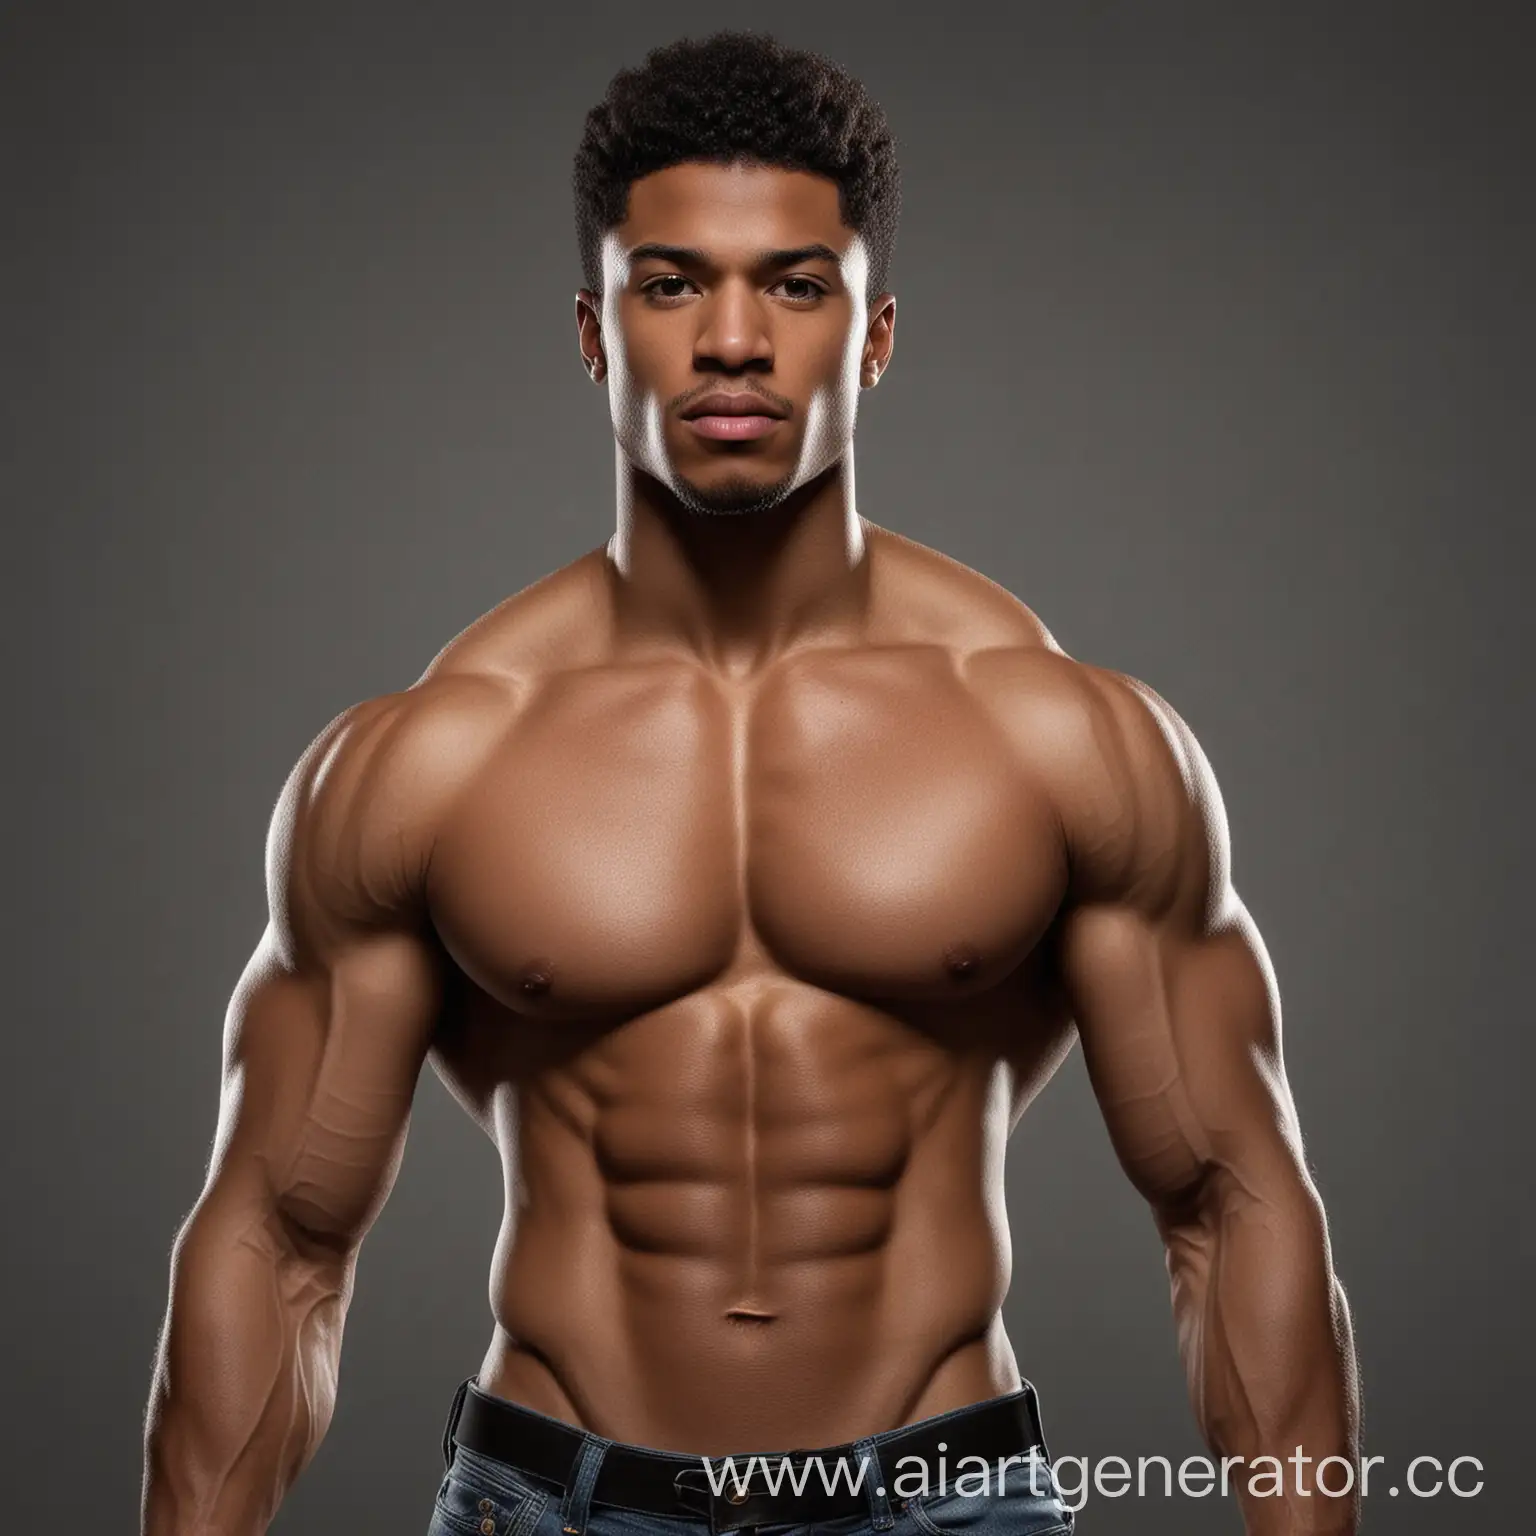 cinematic still photorealistic image, (young adult Afro-Latino male subject with tall lean muscular build, big muscular pecs, muscular arms, symmetrical strong abs, handsome gorgeous masculine alpha male attractive beautiful